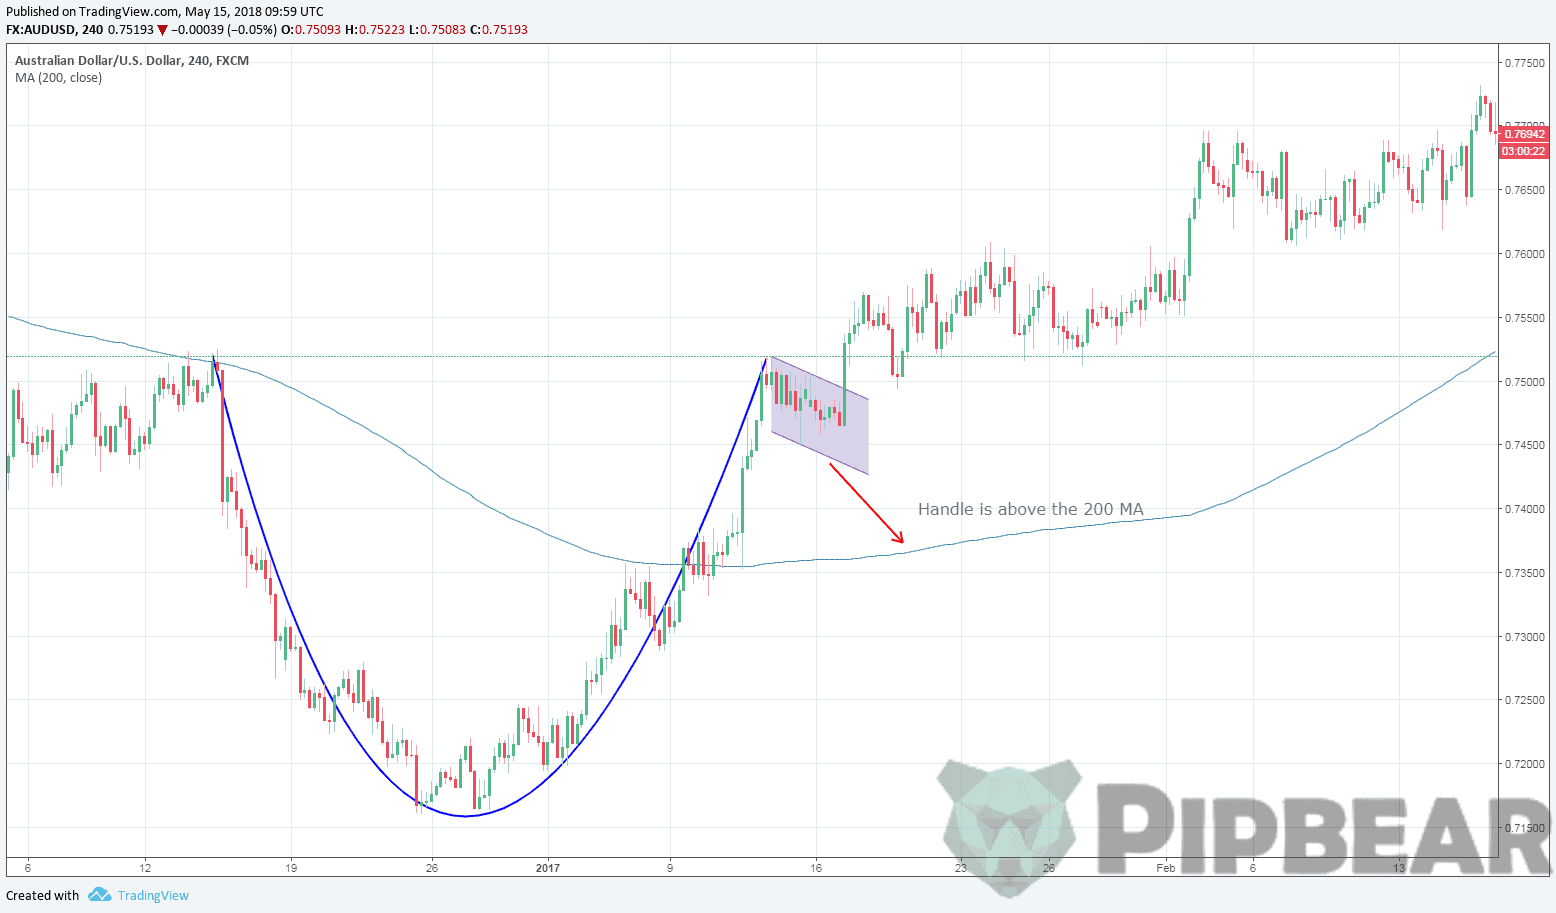 cup and handle